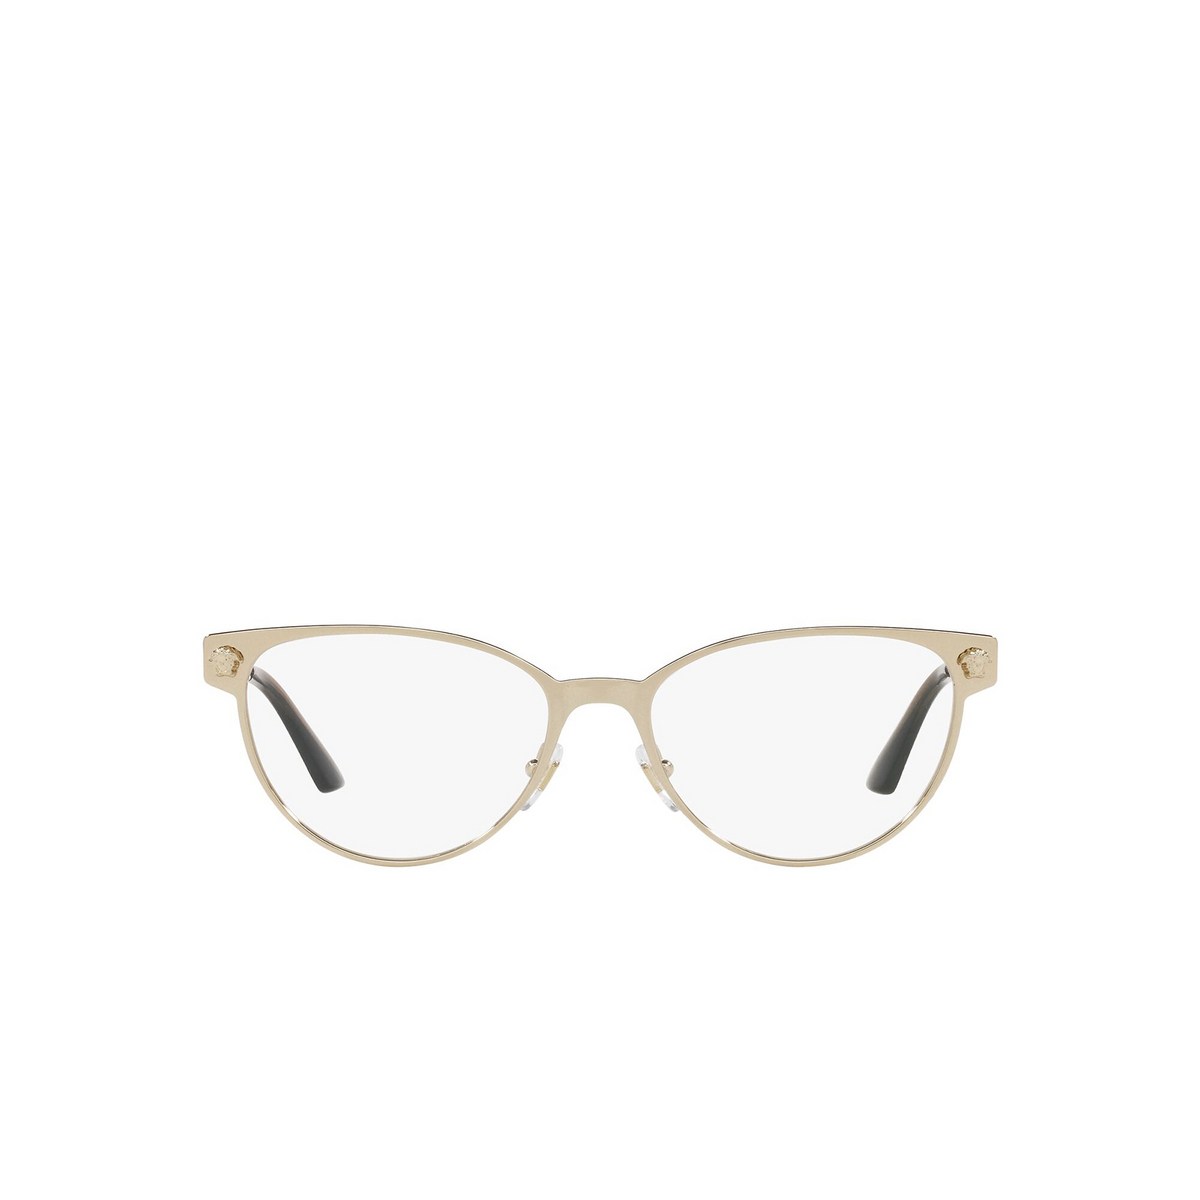 Versace VE1277 Eyeglasses 1252 Pale Gold - front view